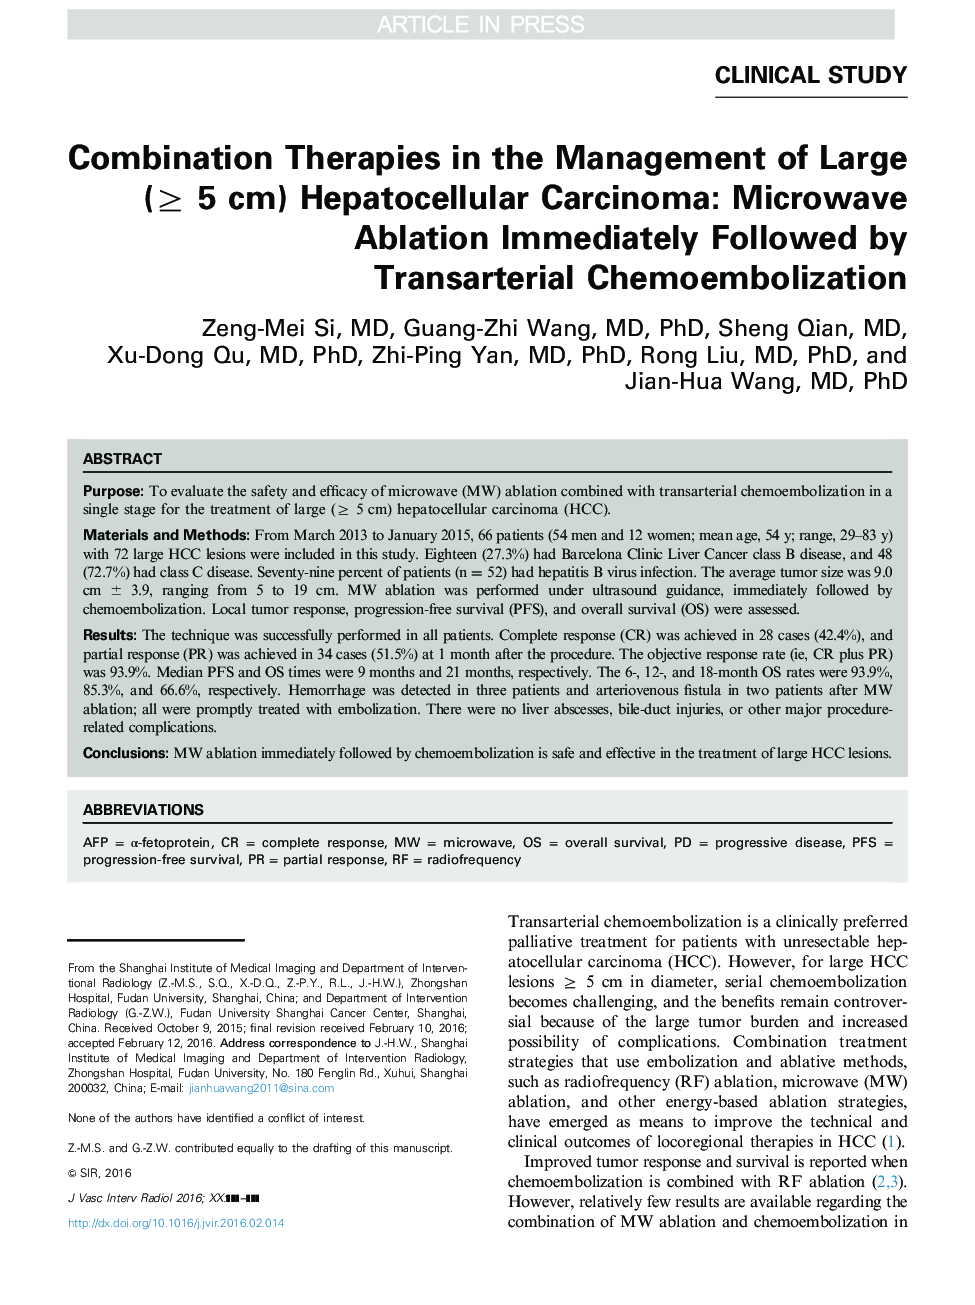 Combination Therapies in the Management of Large (â¥ 5 cm) Hepatocellular Carcinoma: Microwave Ablation Immediately Followed by Transarterial Chemoembolization